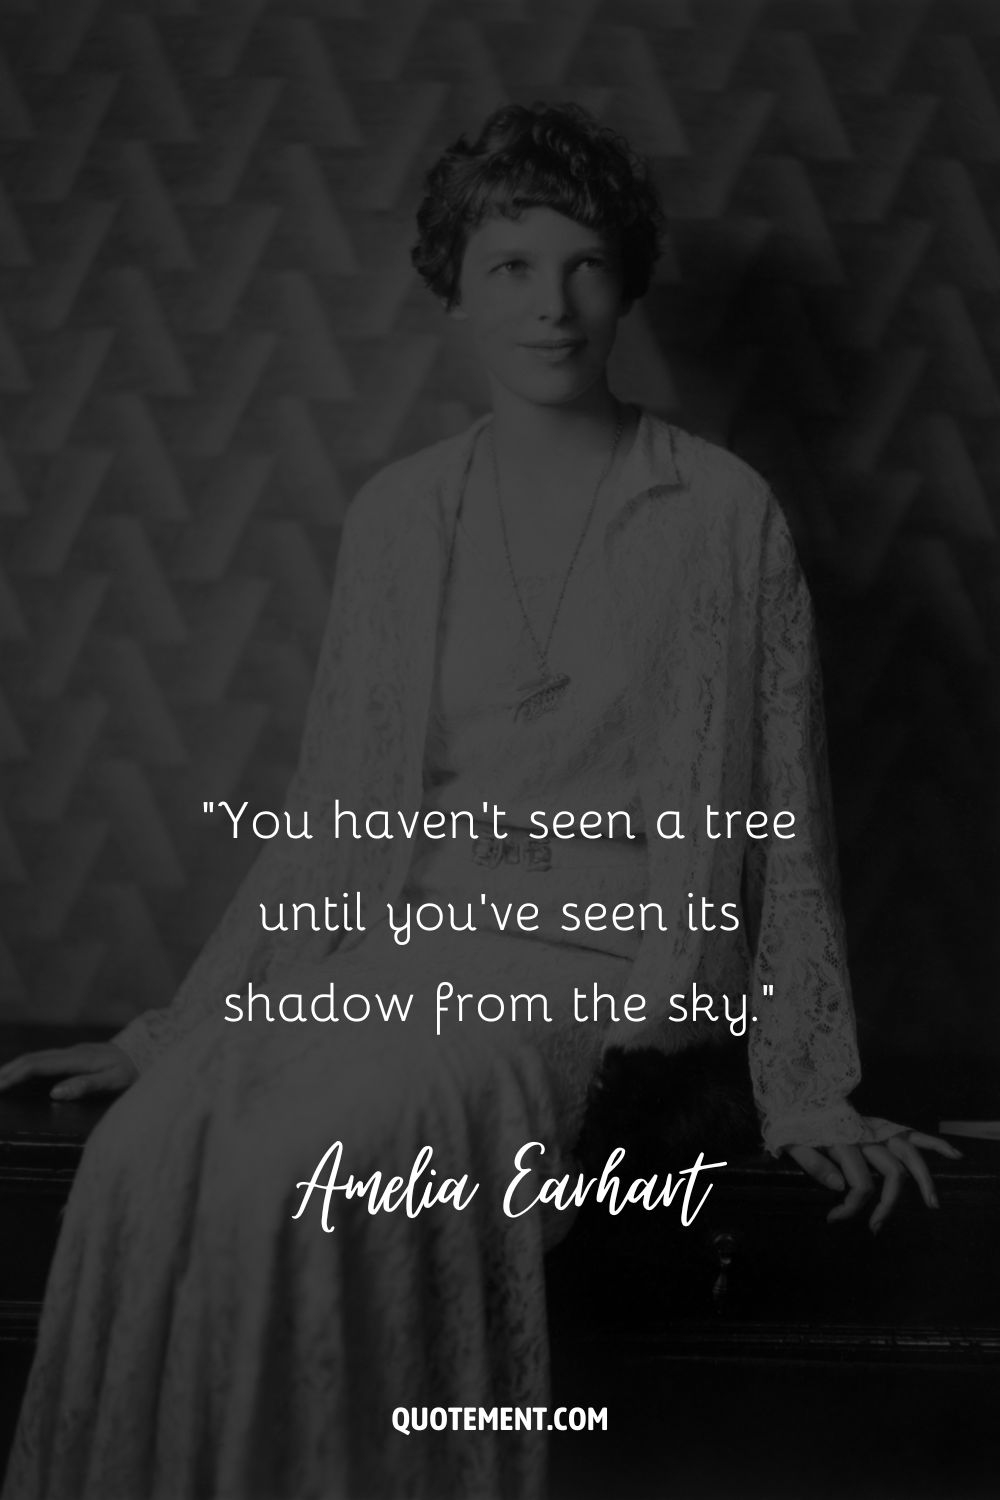 “You haven't seen a tree until you've seen its shadow from the sky.” ― Amelia Earhart